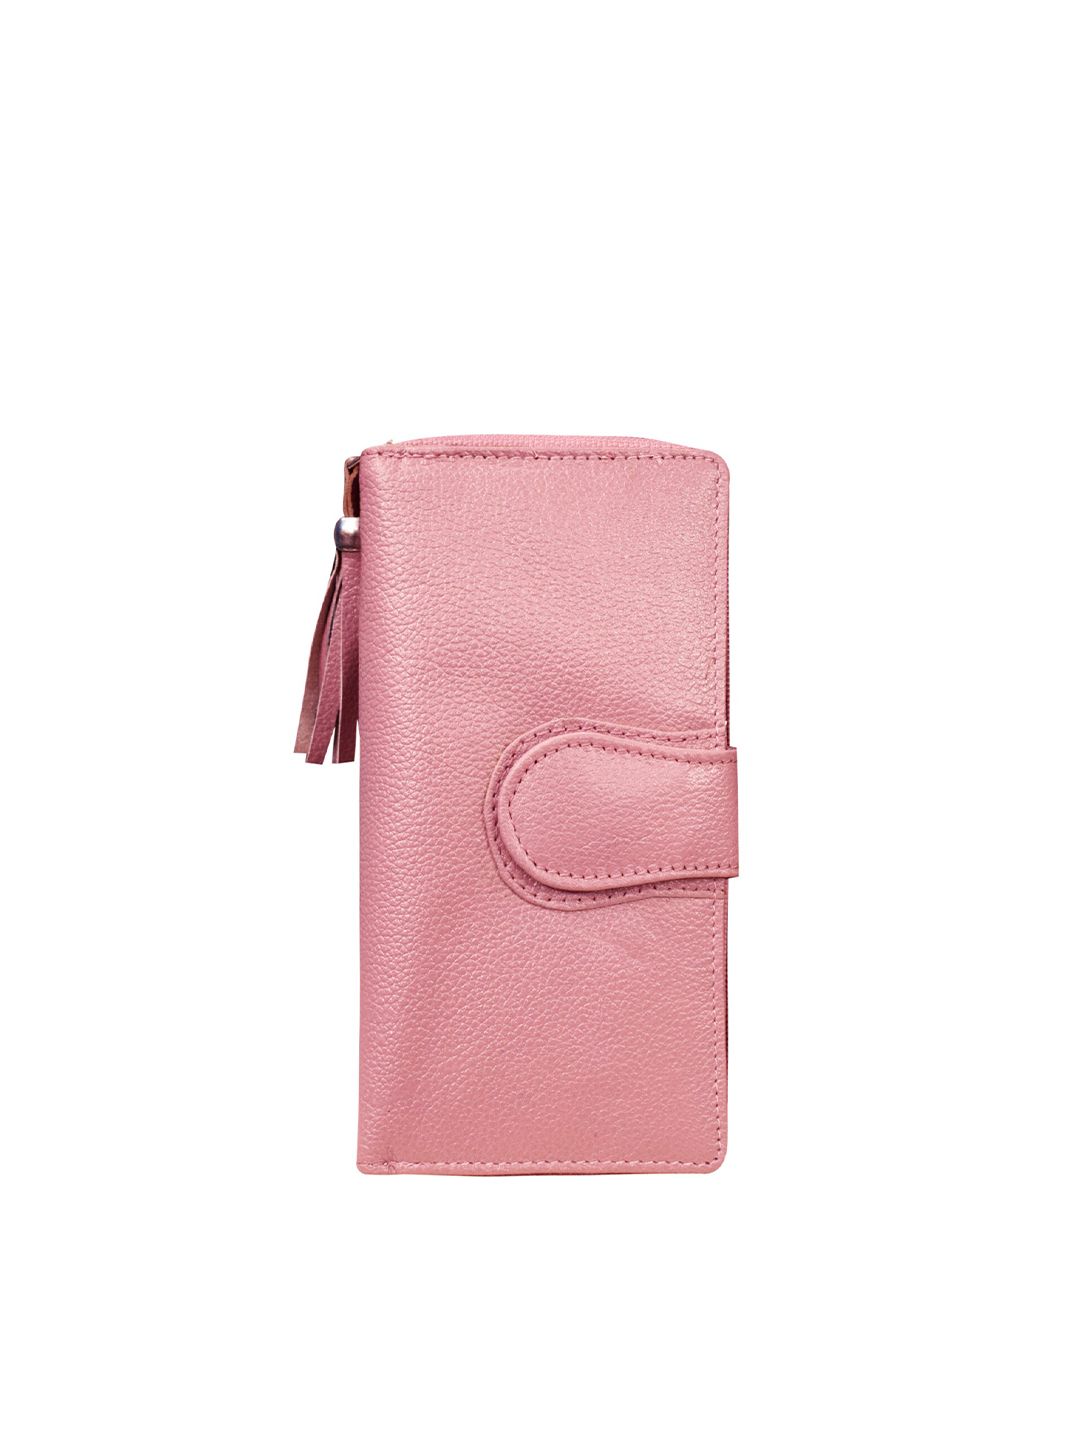 ABYS Women Pink Solid Leather Zip Around Wallet Price in India